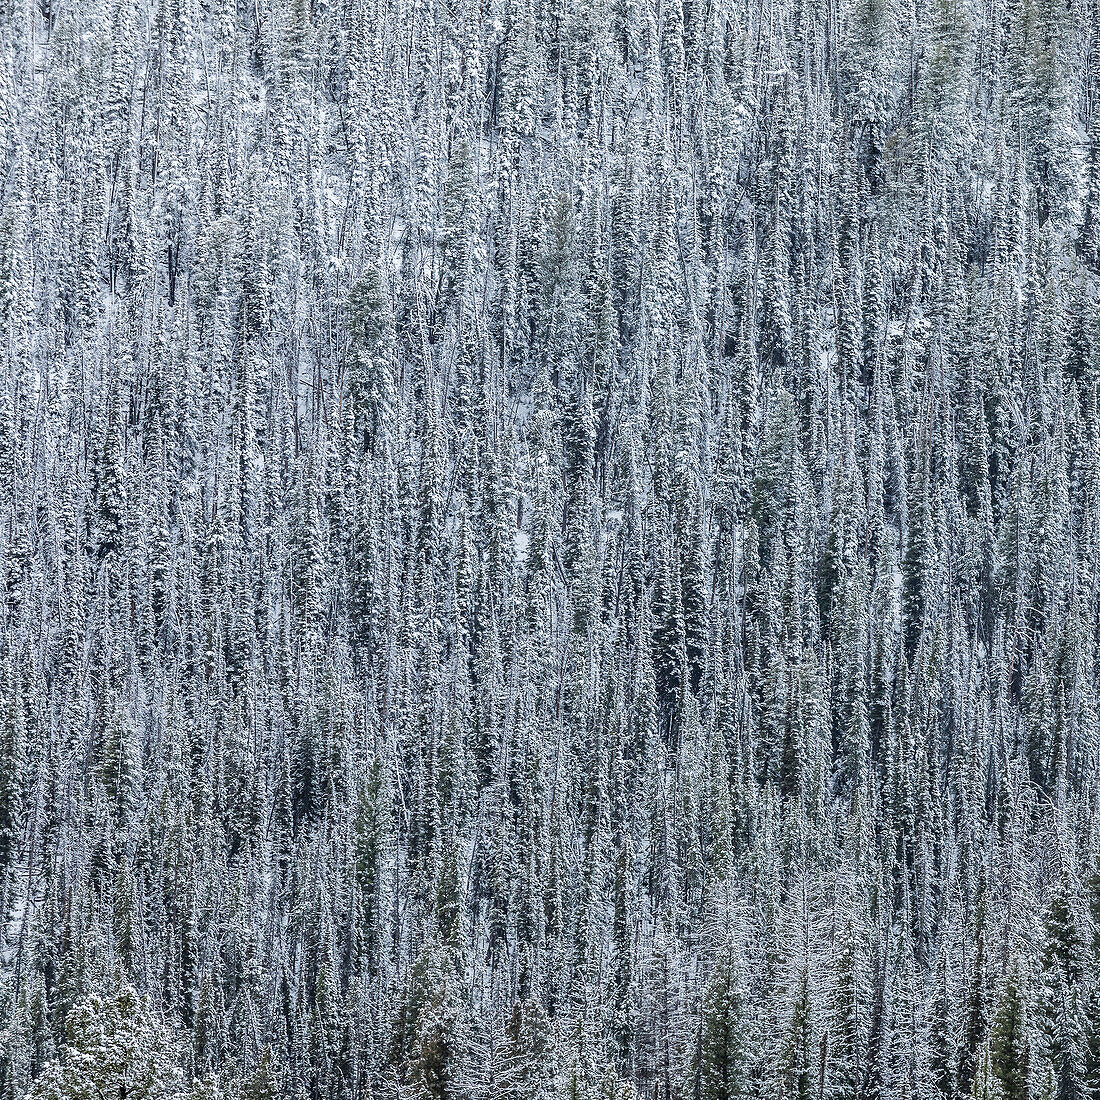 USA, Idaho, Stanley, High angle view of pine forest in Winter